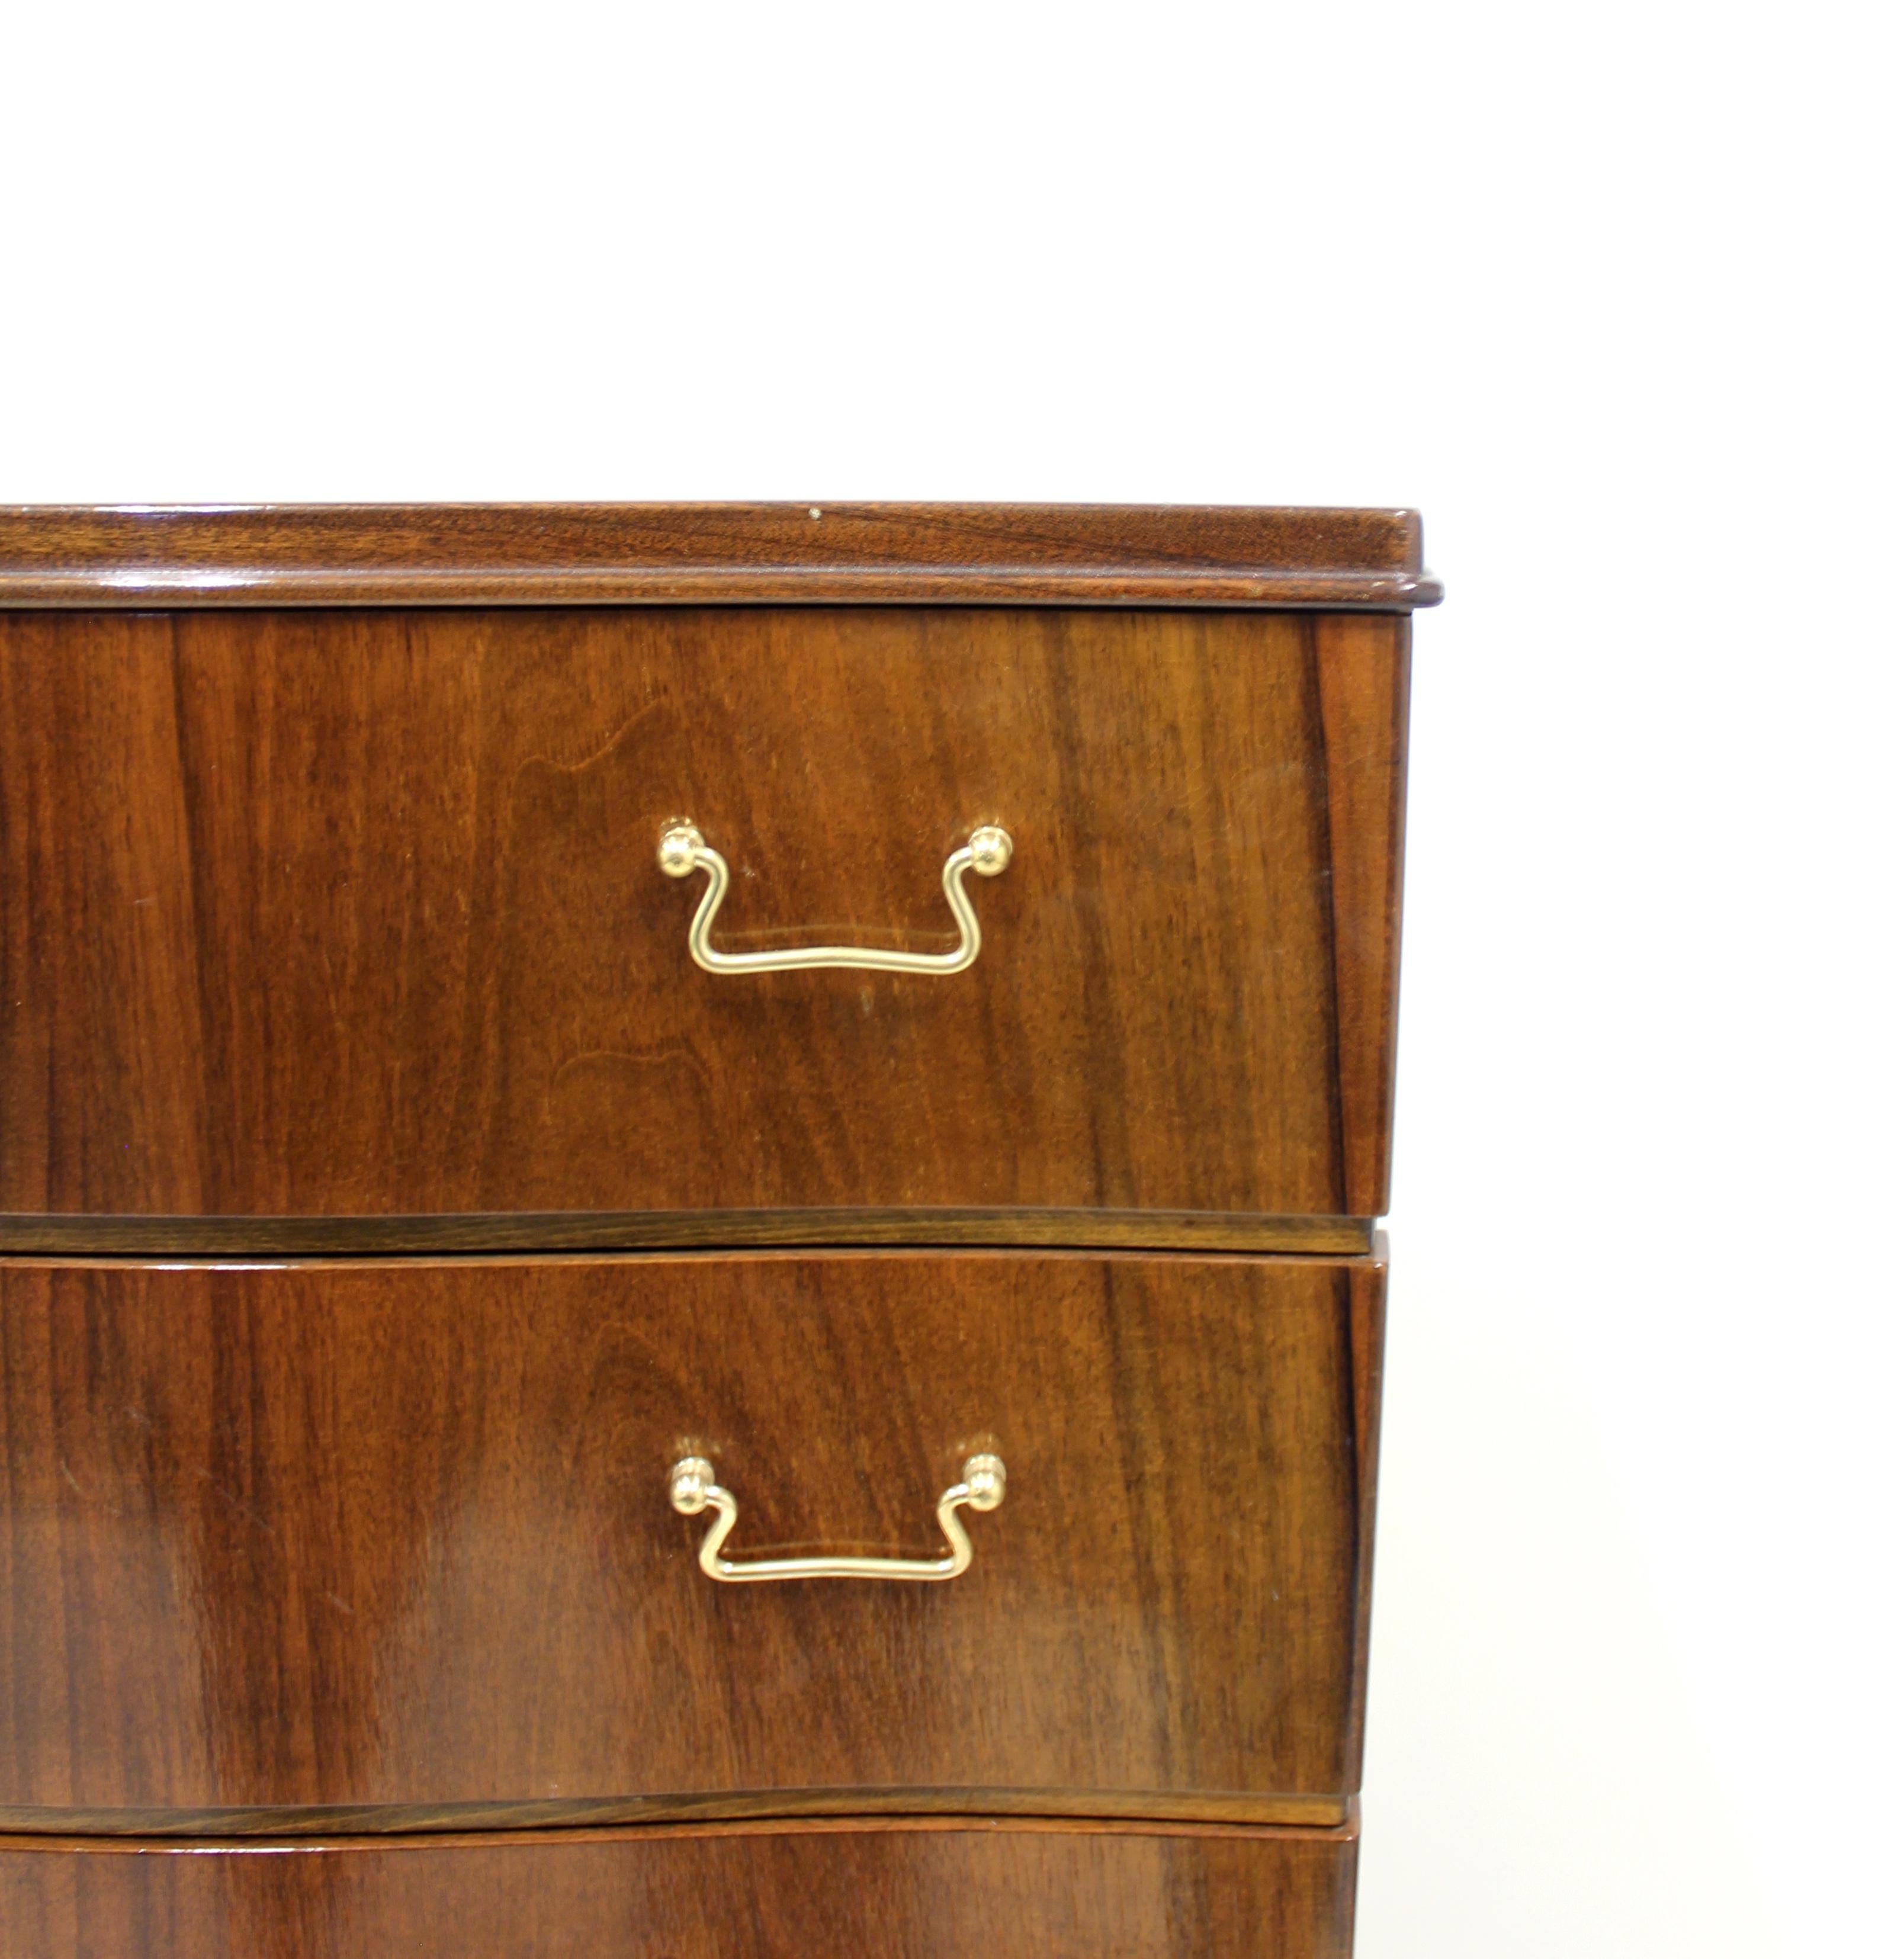 20th Century Midcentury Scandinavian Curved Walnut Chest of Drawers, 1950s